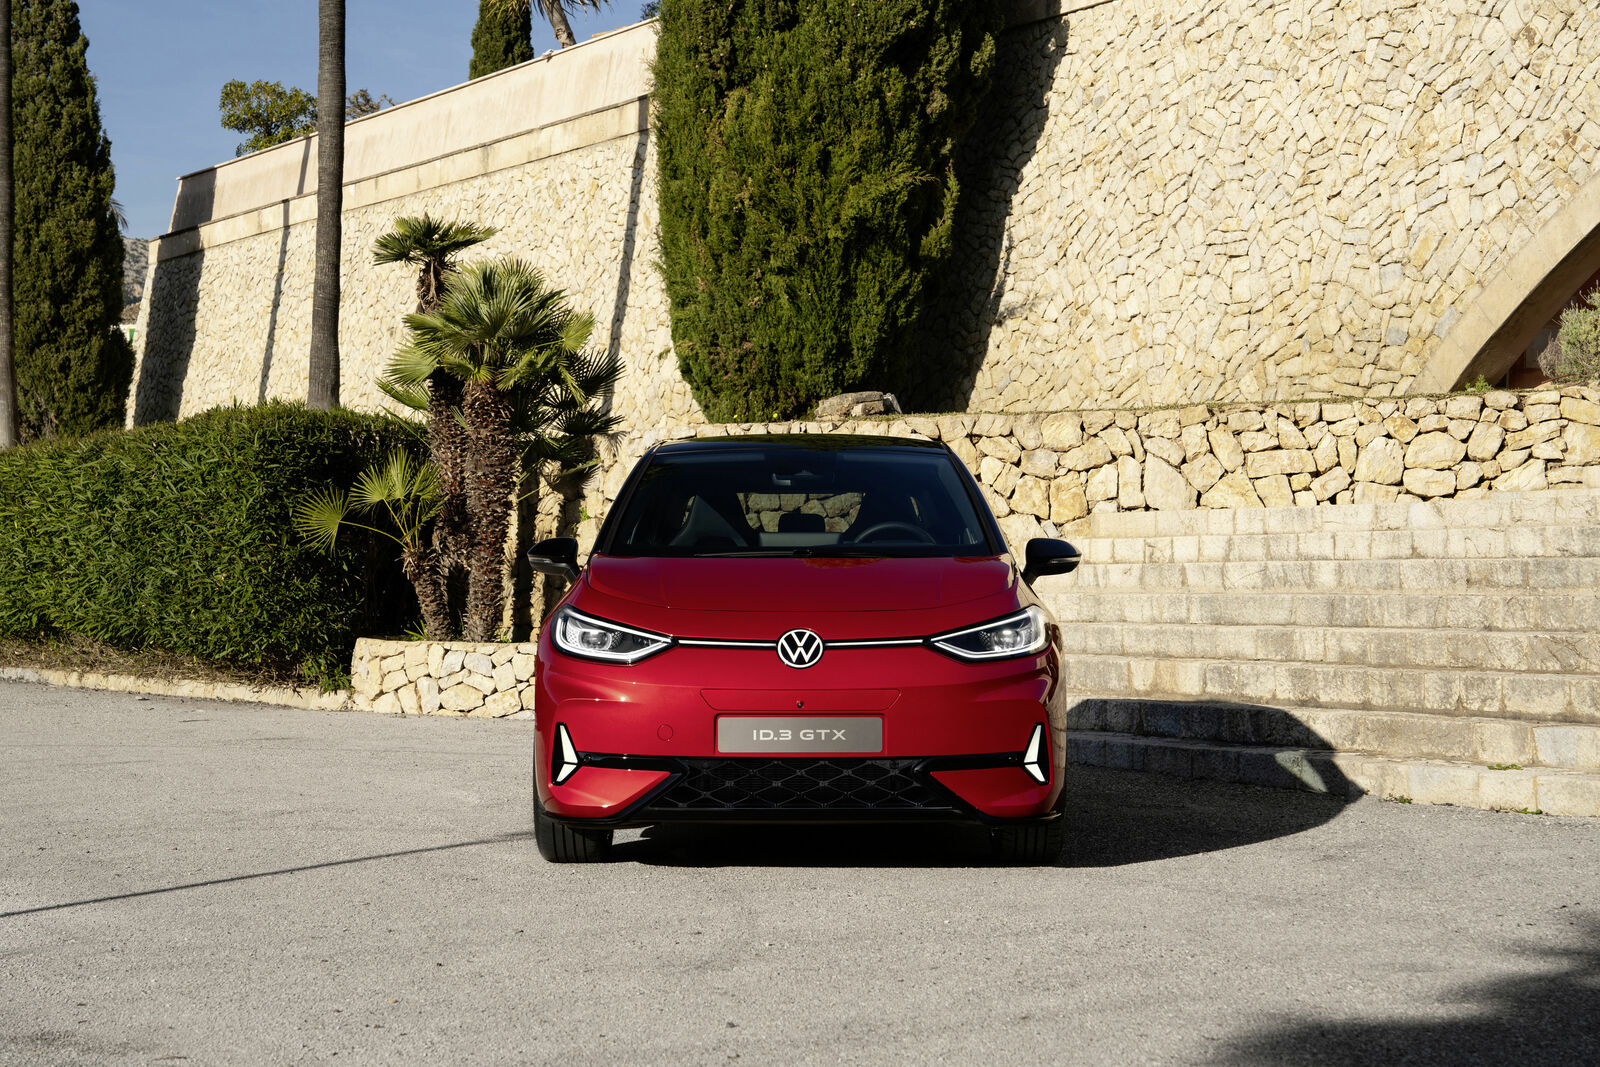 The all-electric Volkswagen ID.3 GTX